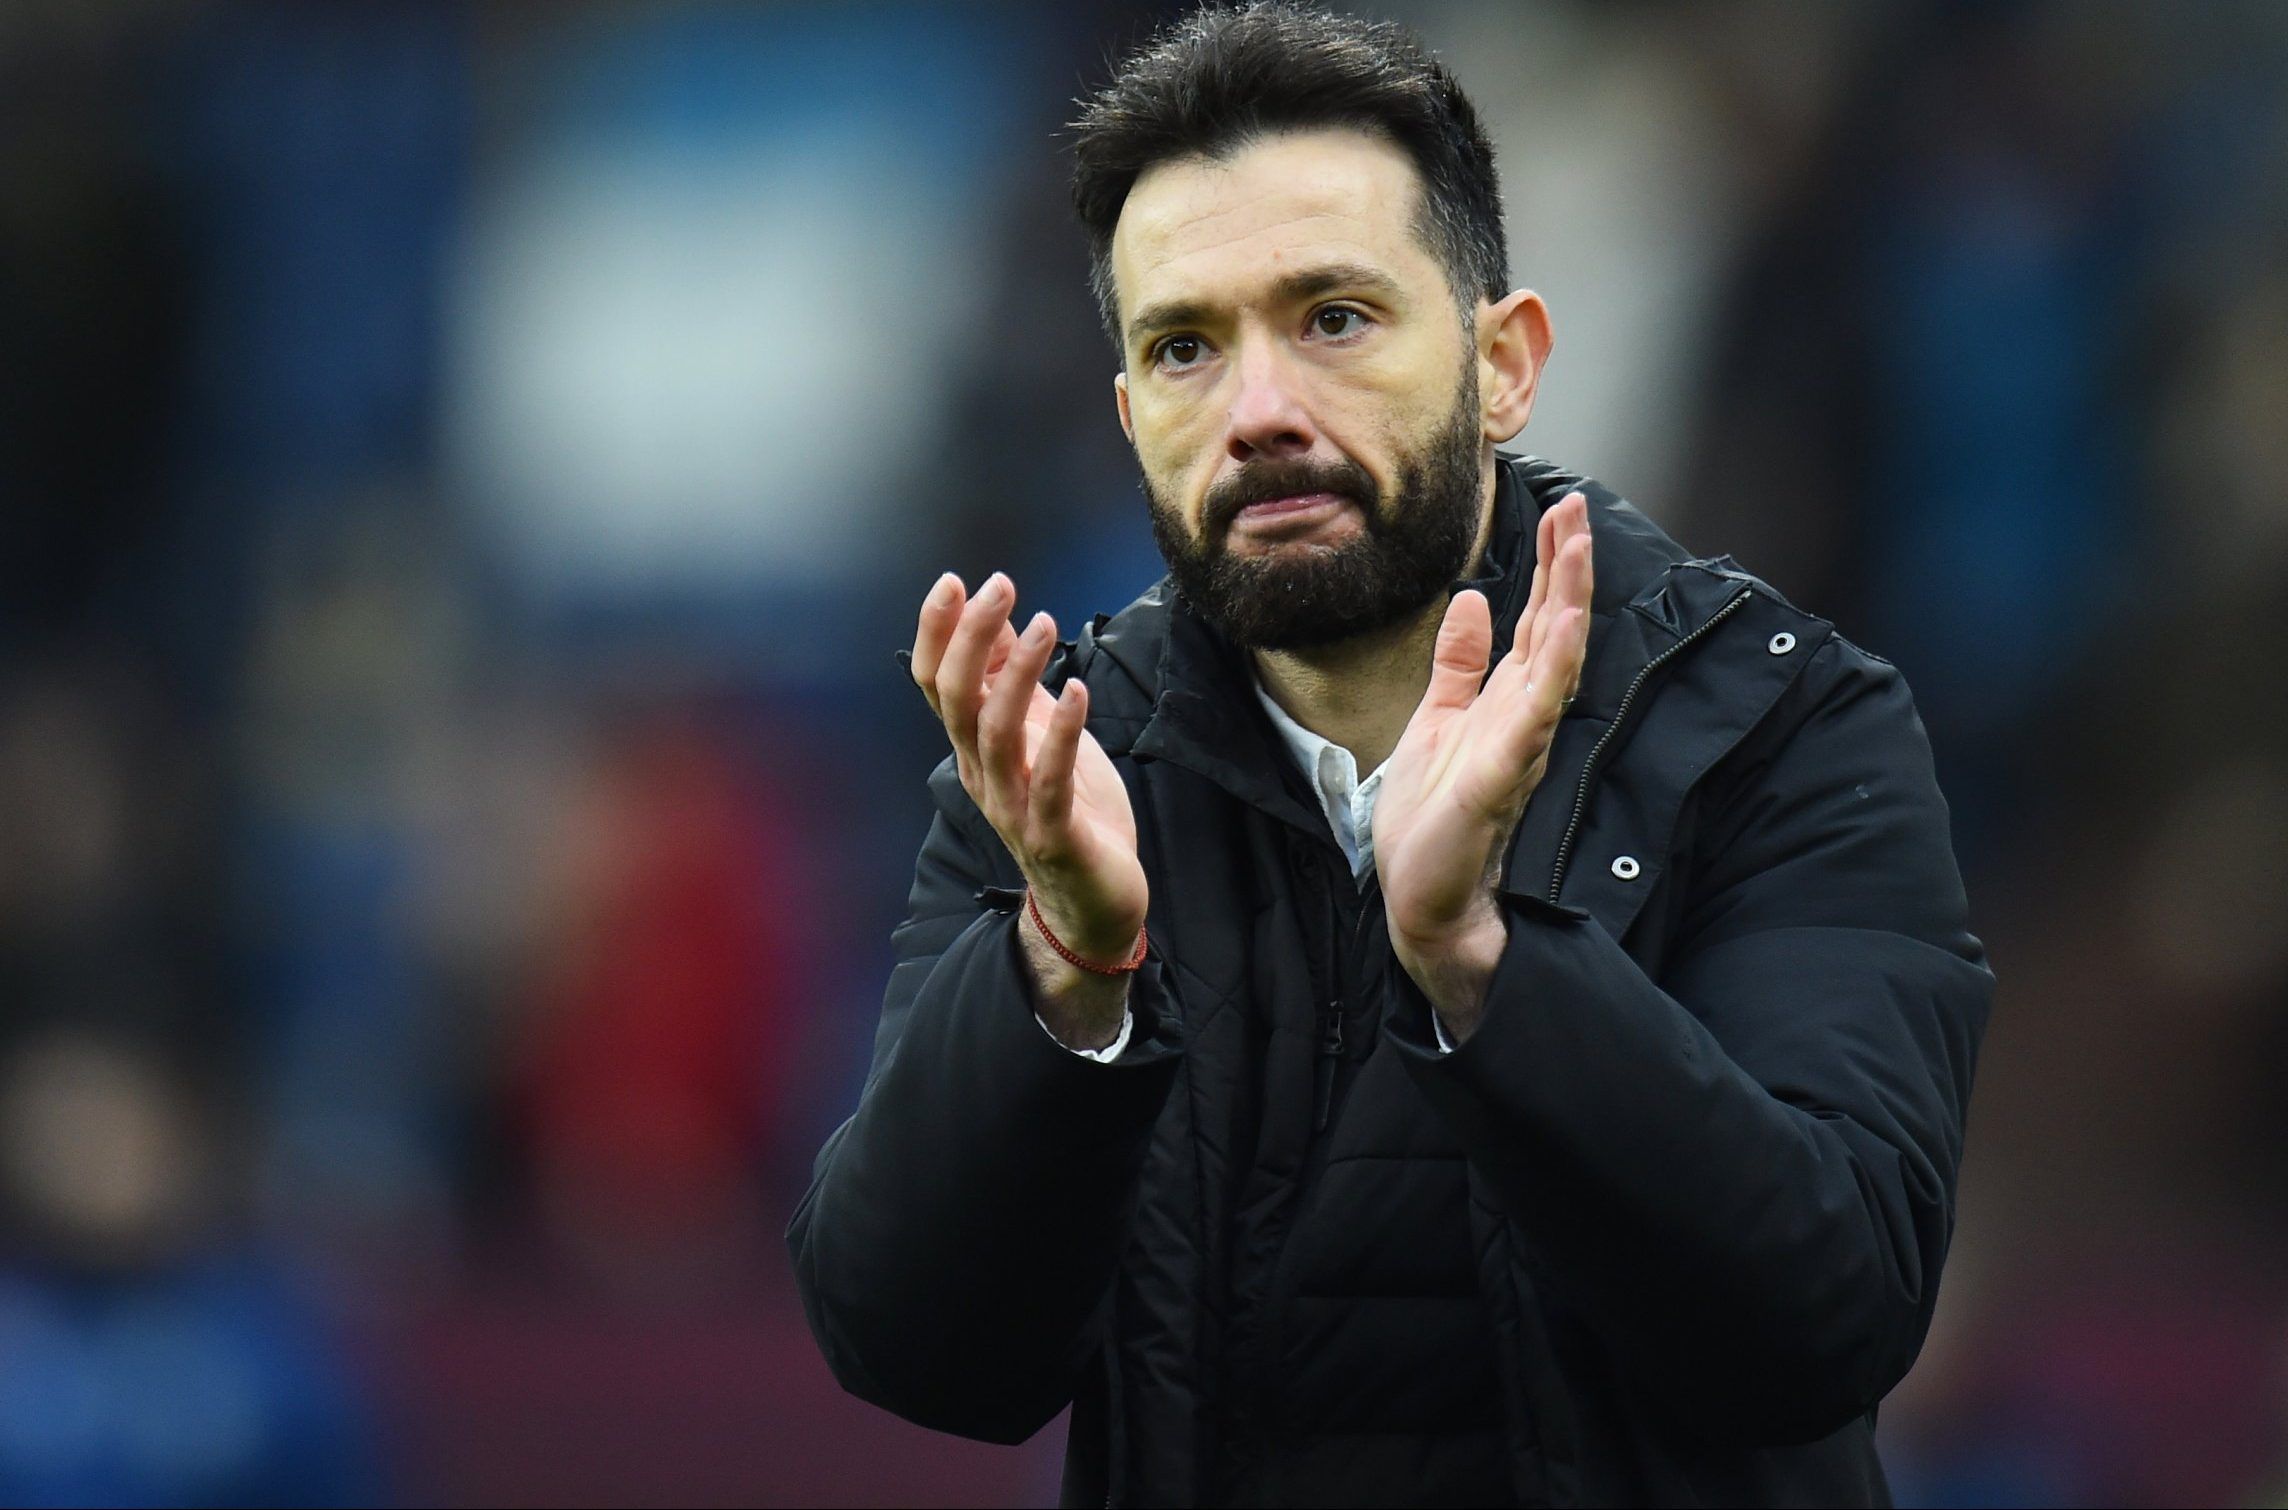 Huddersfield Town boss Carlos Corberan claps fans after FA Cup game vs Burnley